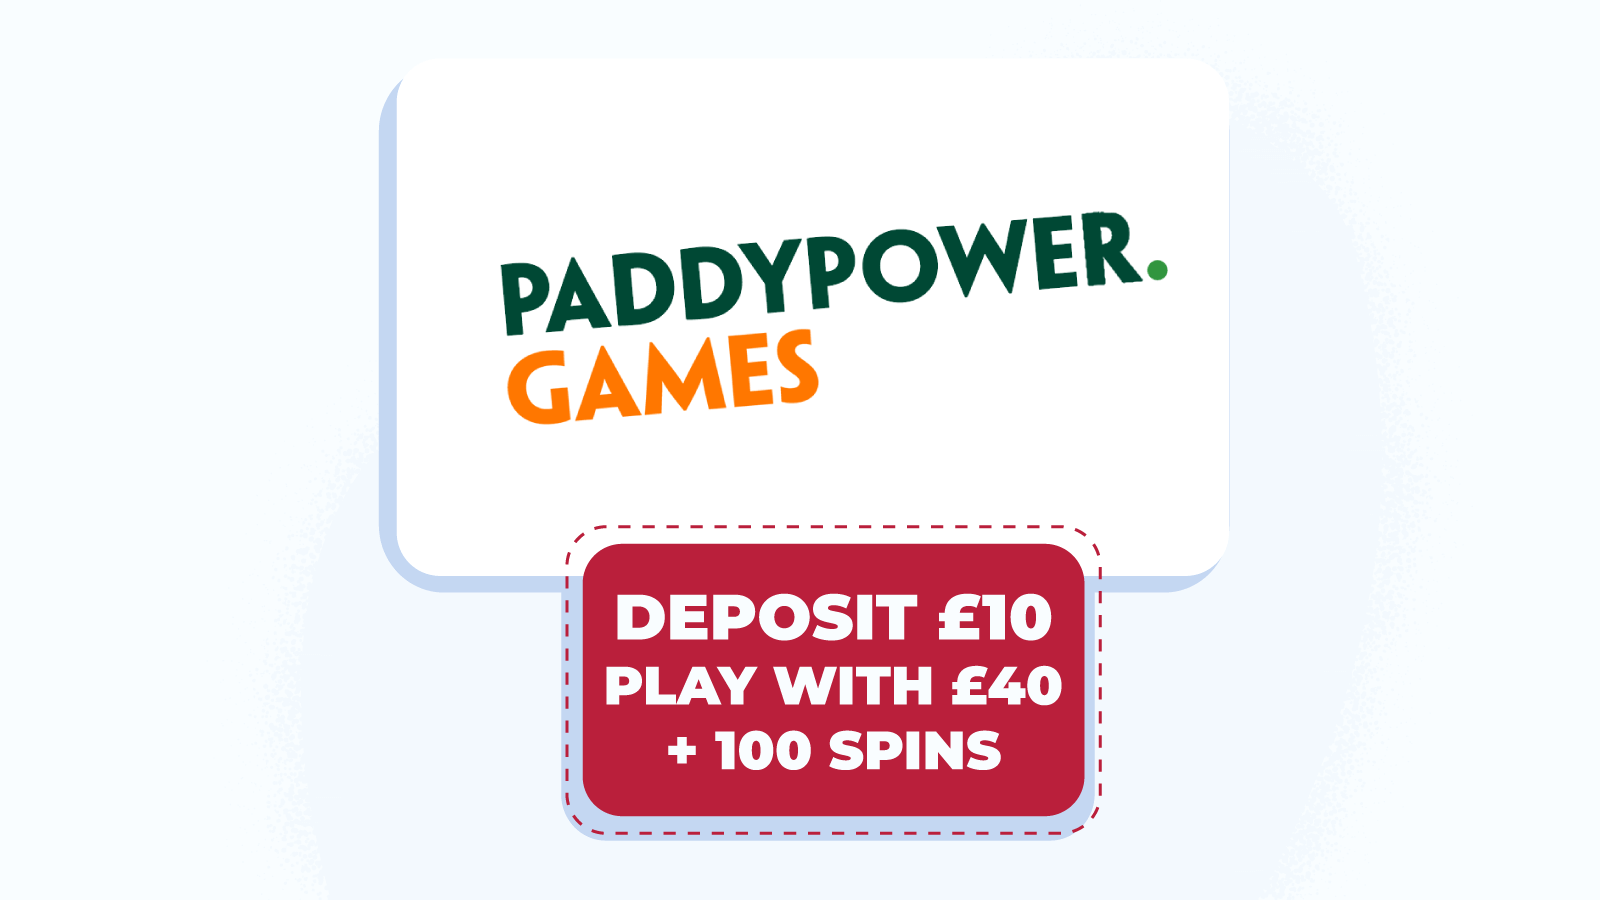 Deposit £10, play with £40 + 100 spins at Paddy Power Games – best 300% casino bonus